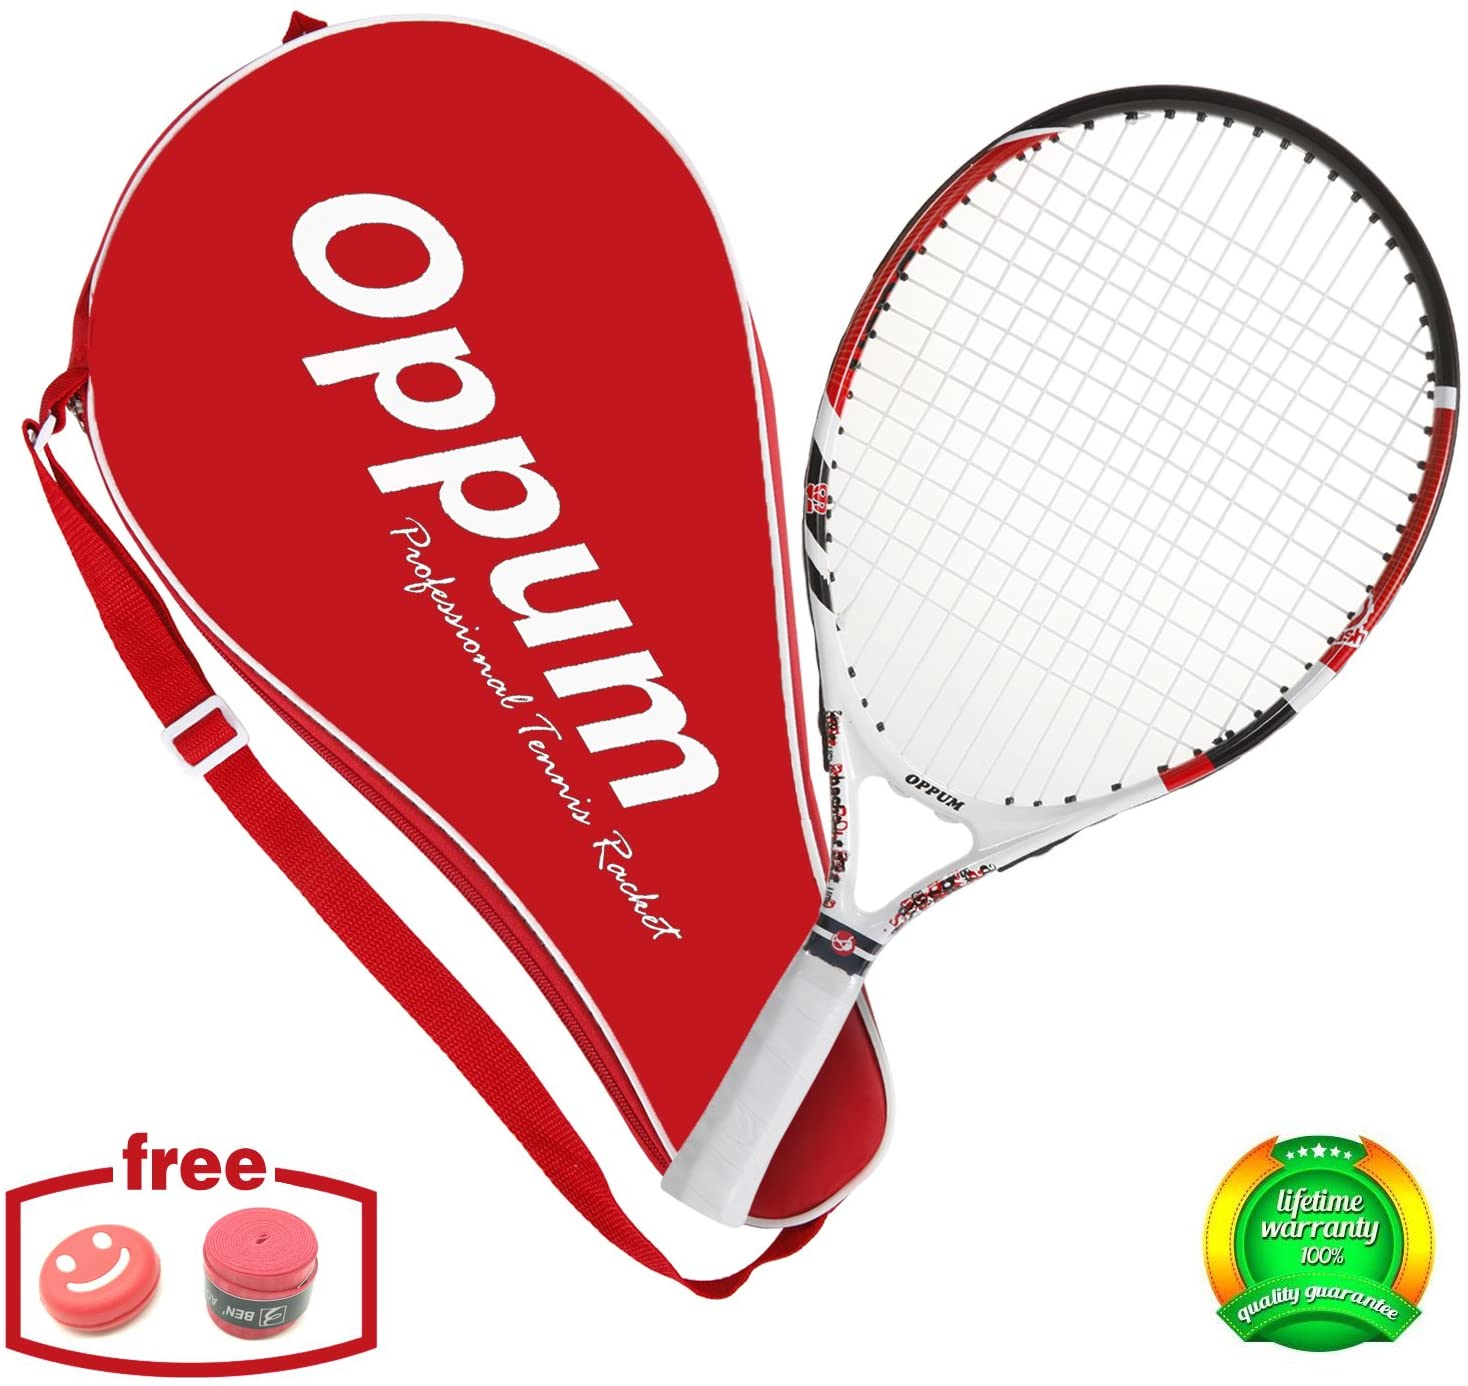 oppum US Open Junior Tennis Racket for Kids Children Toddlers, Coach Recommended Racquet, Include Tennis Bag Overgrip Vibration Dampener